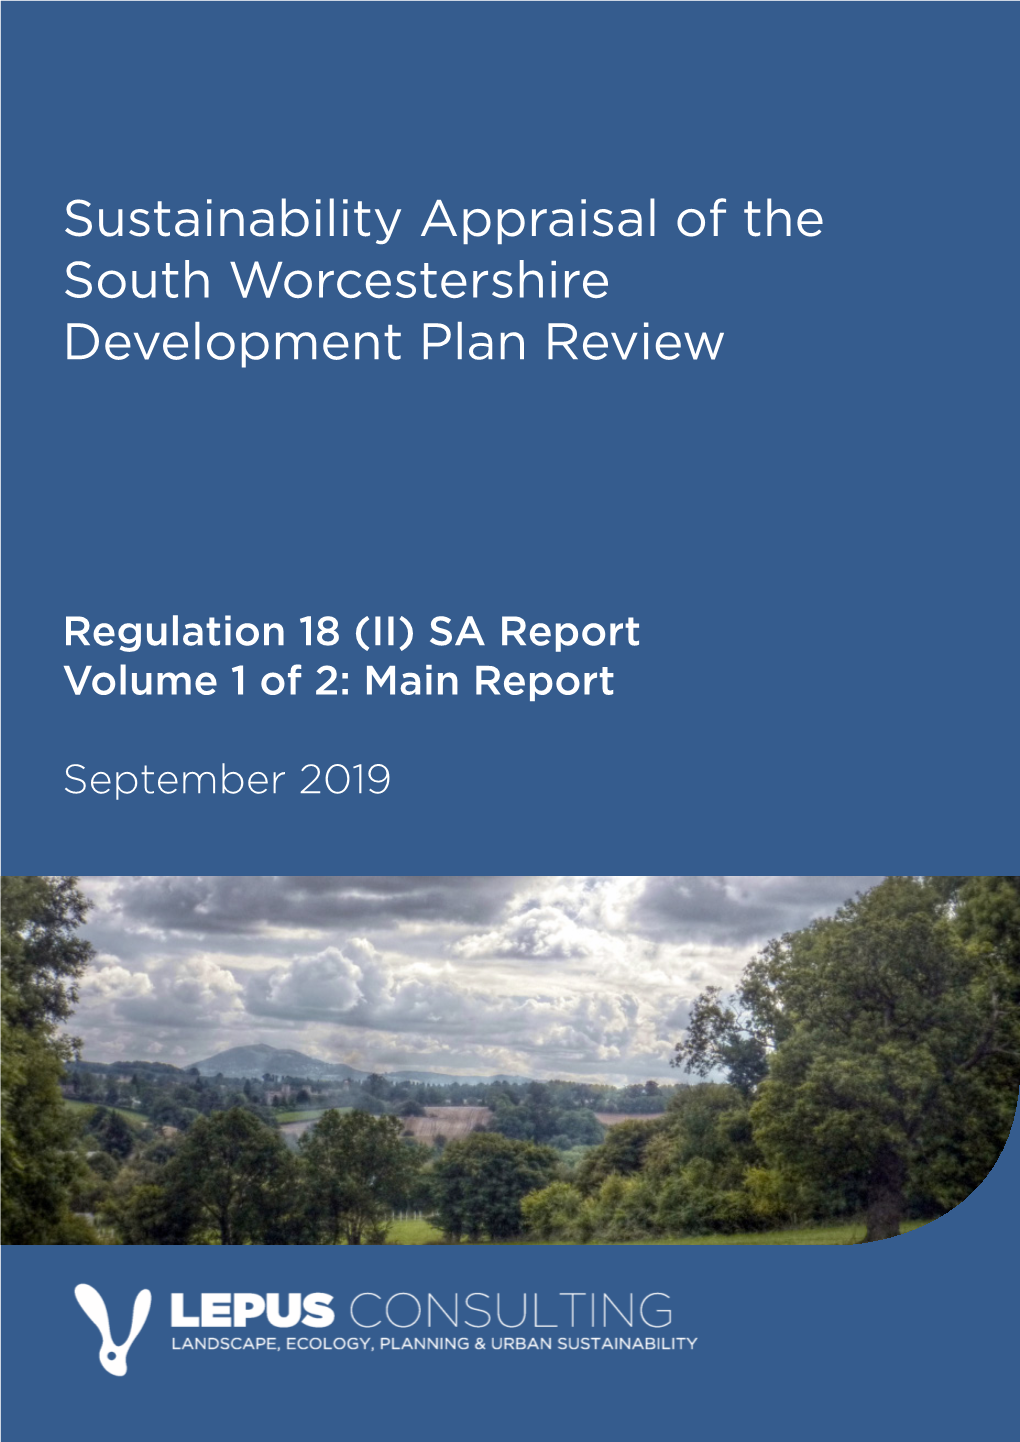 Sustainability Appraisal of the South Worcestershire Development Plan Review